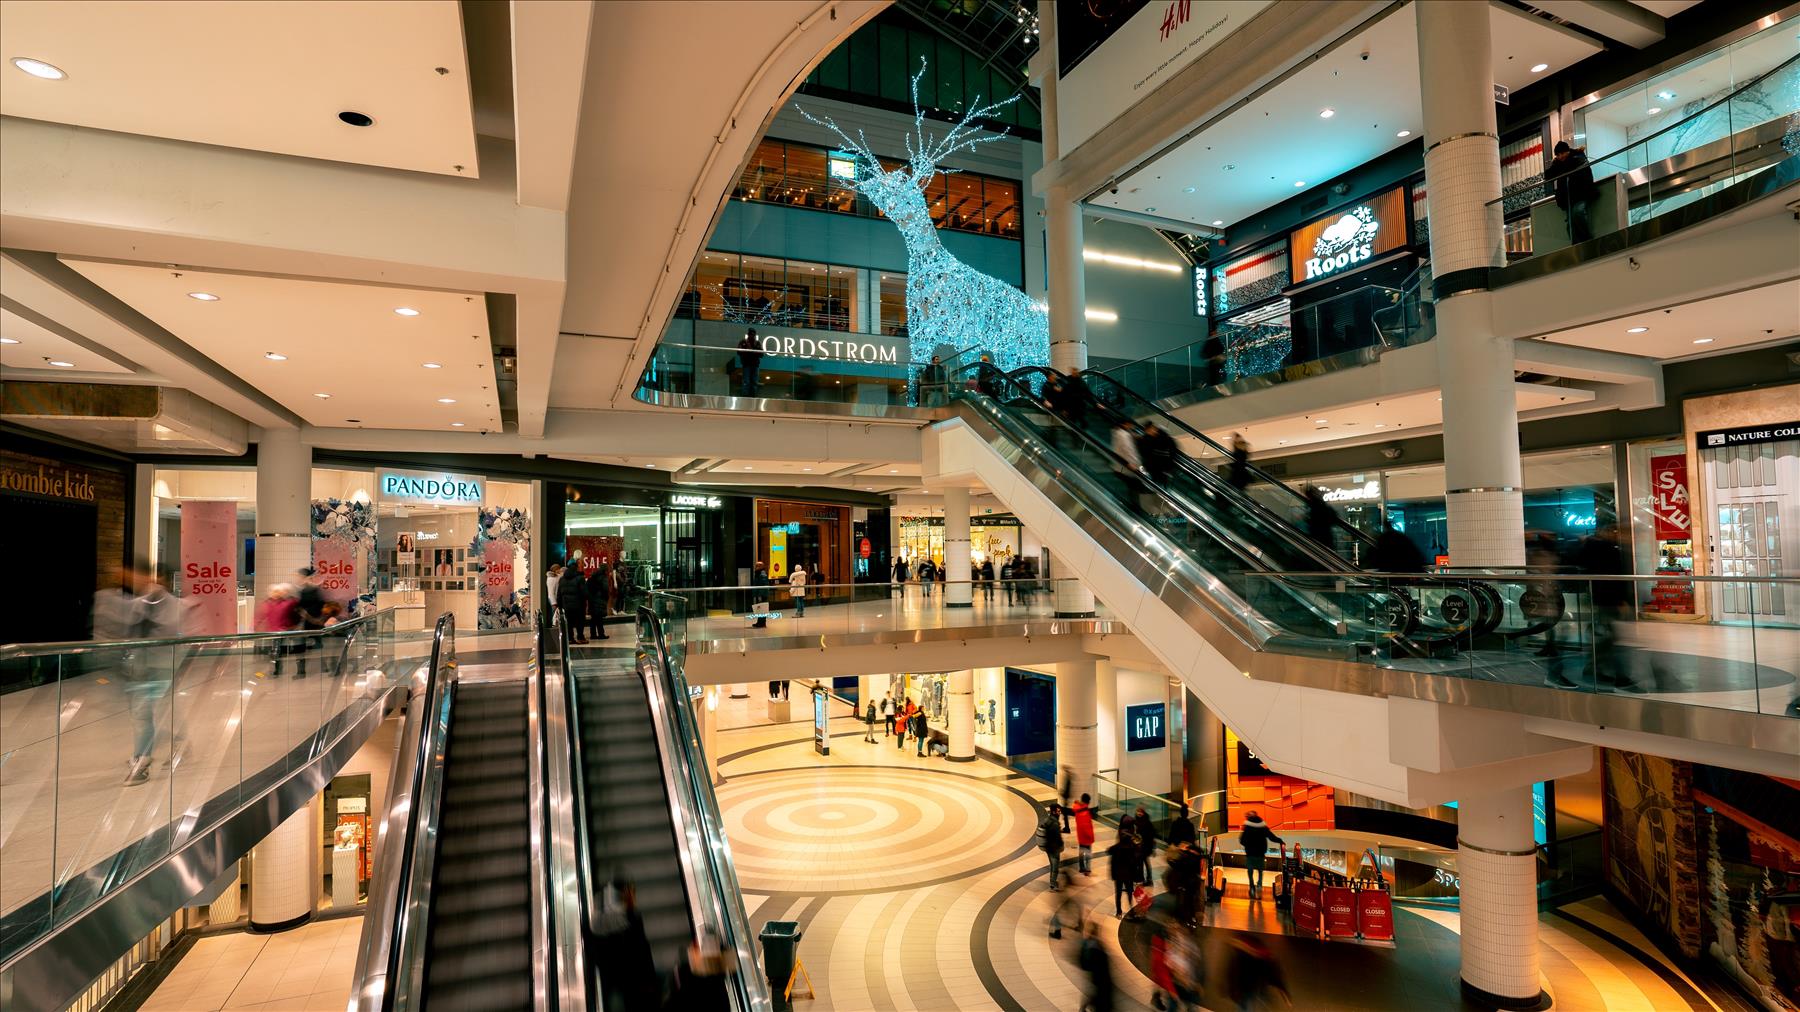 Never seen anything as catastrophic Malls in Canada face massive hit as unpaid rent surges